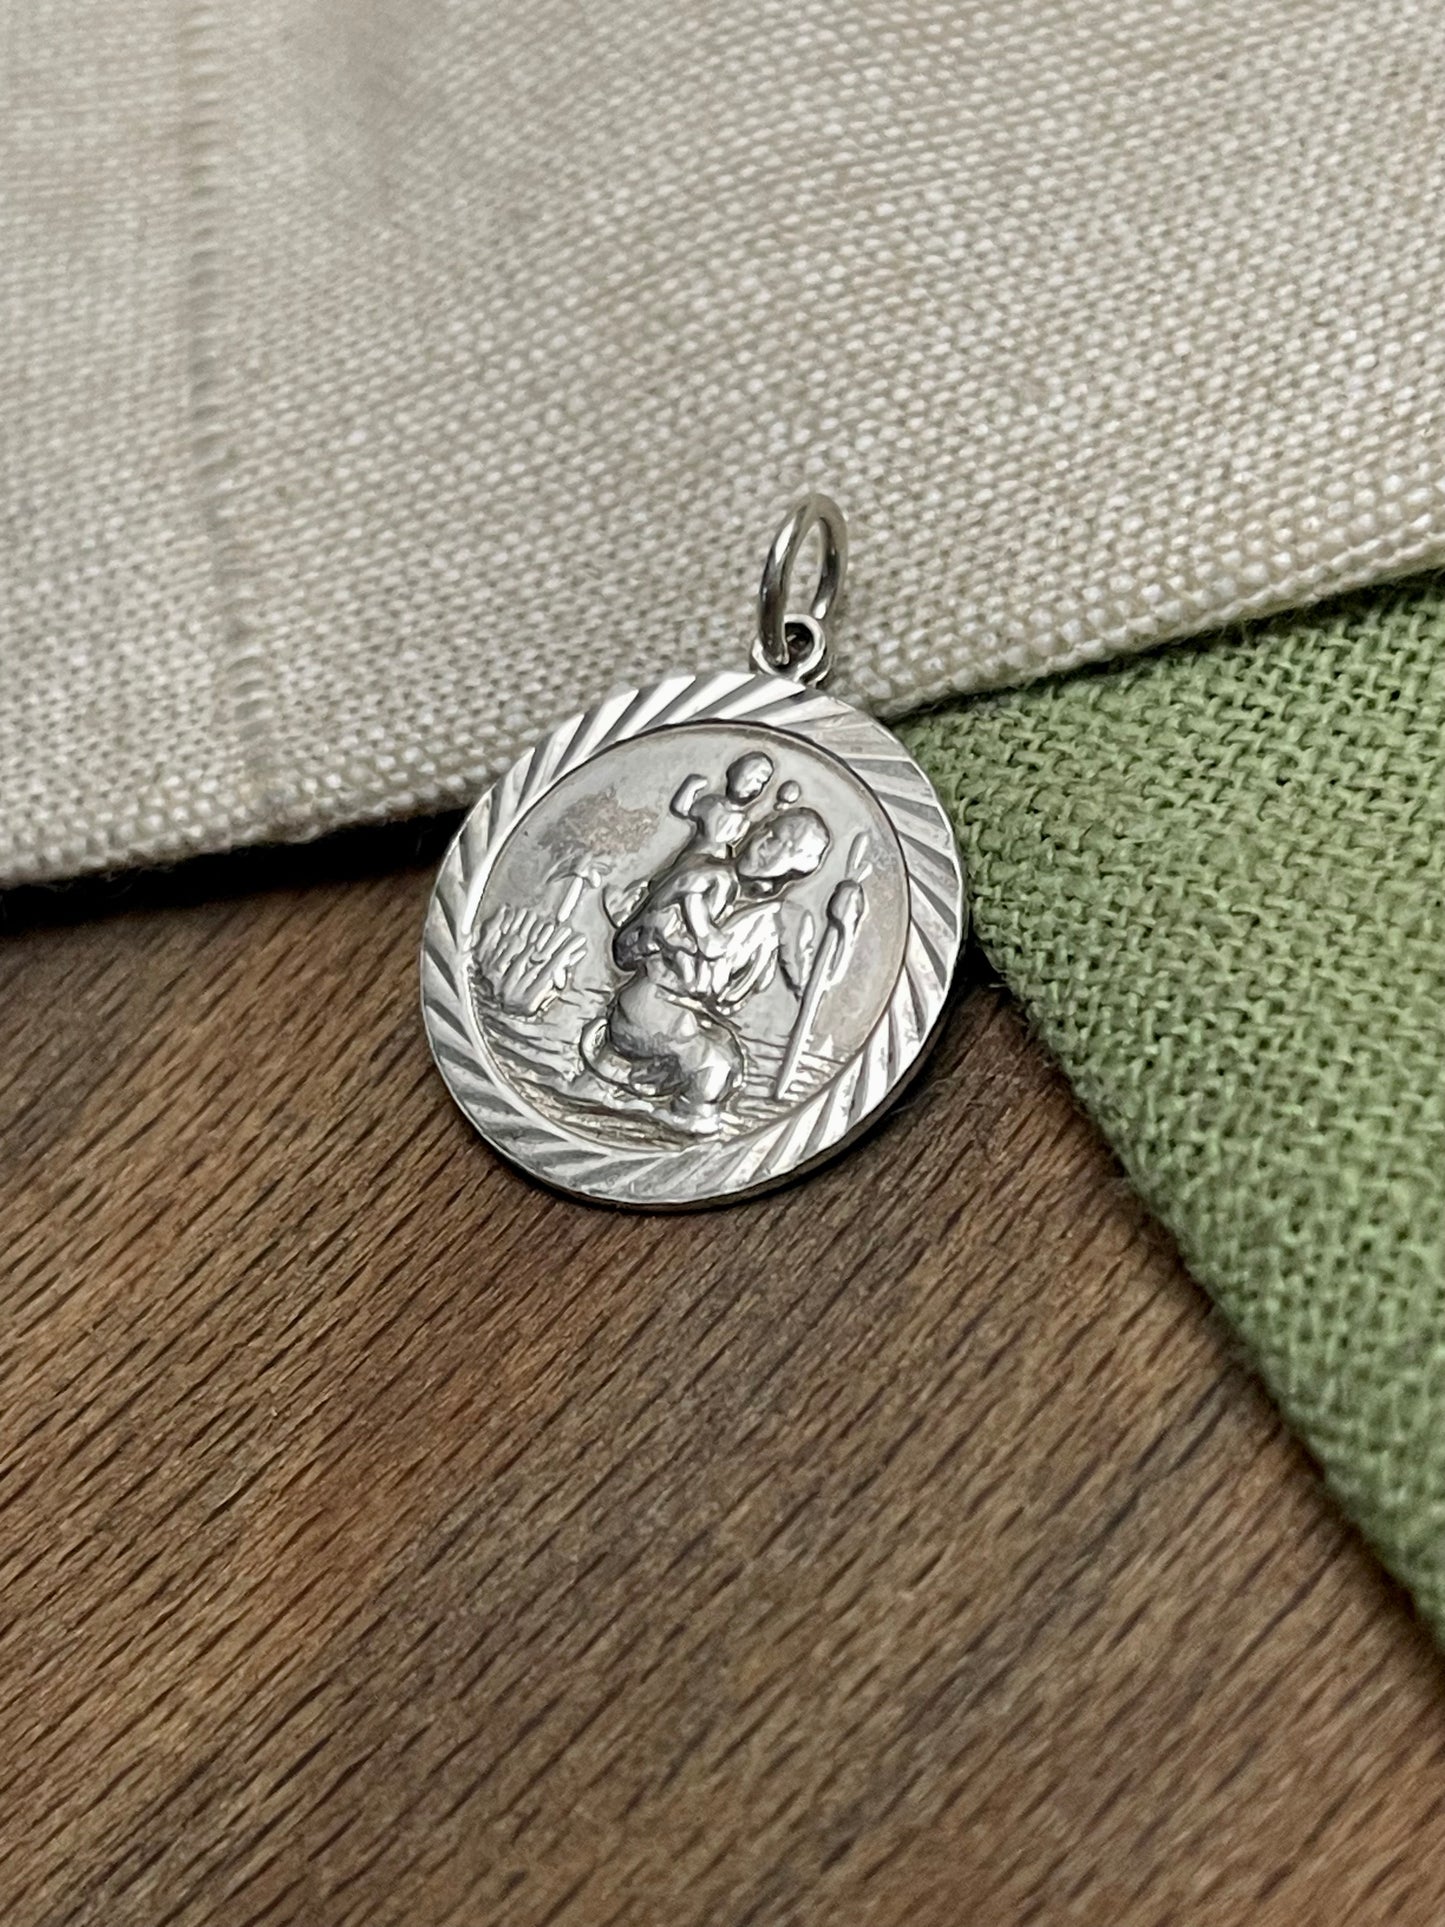 St Christopher Travel Necklace Pendant Sterling 925 Silver Vintage Jewelry